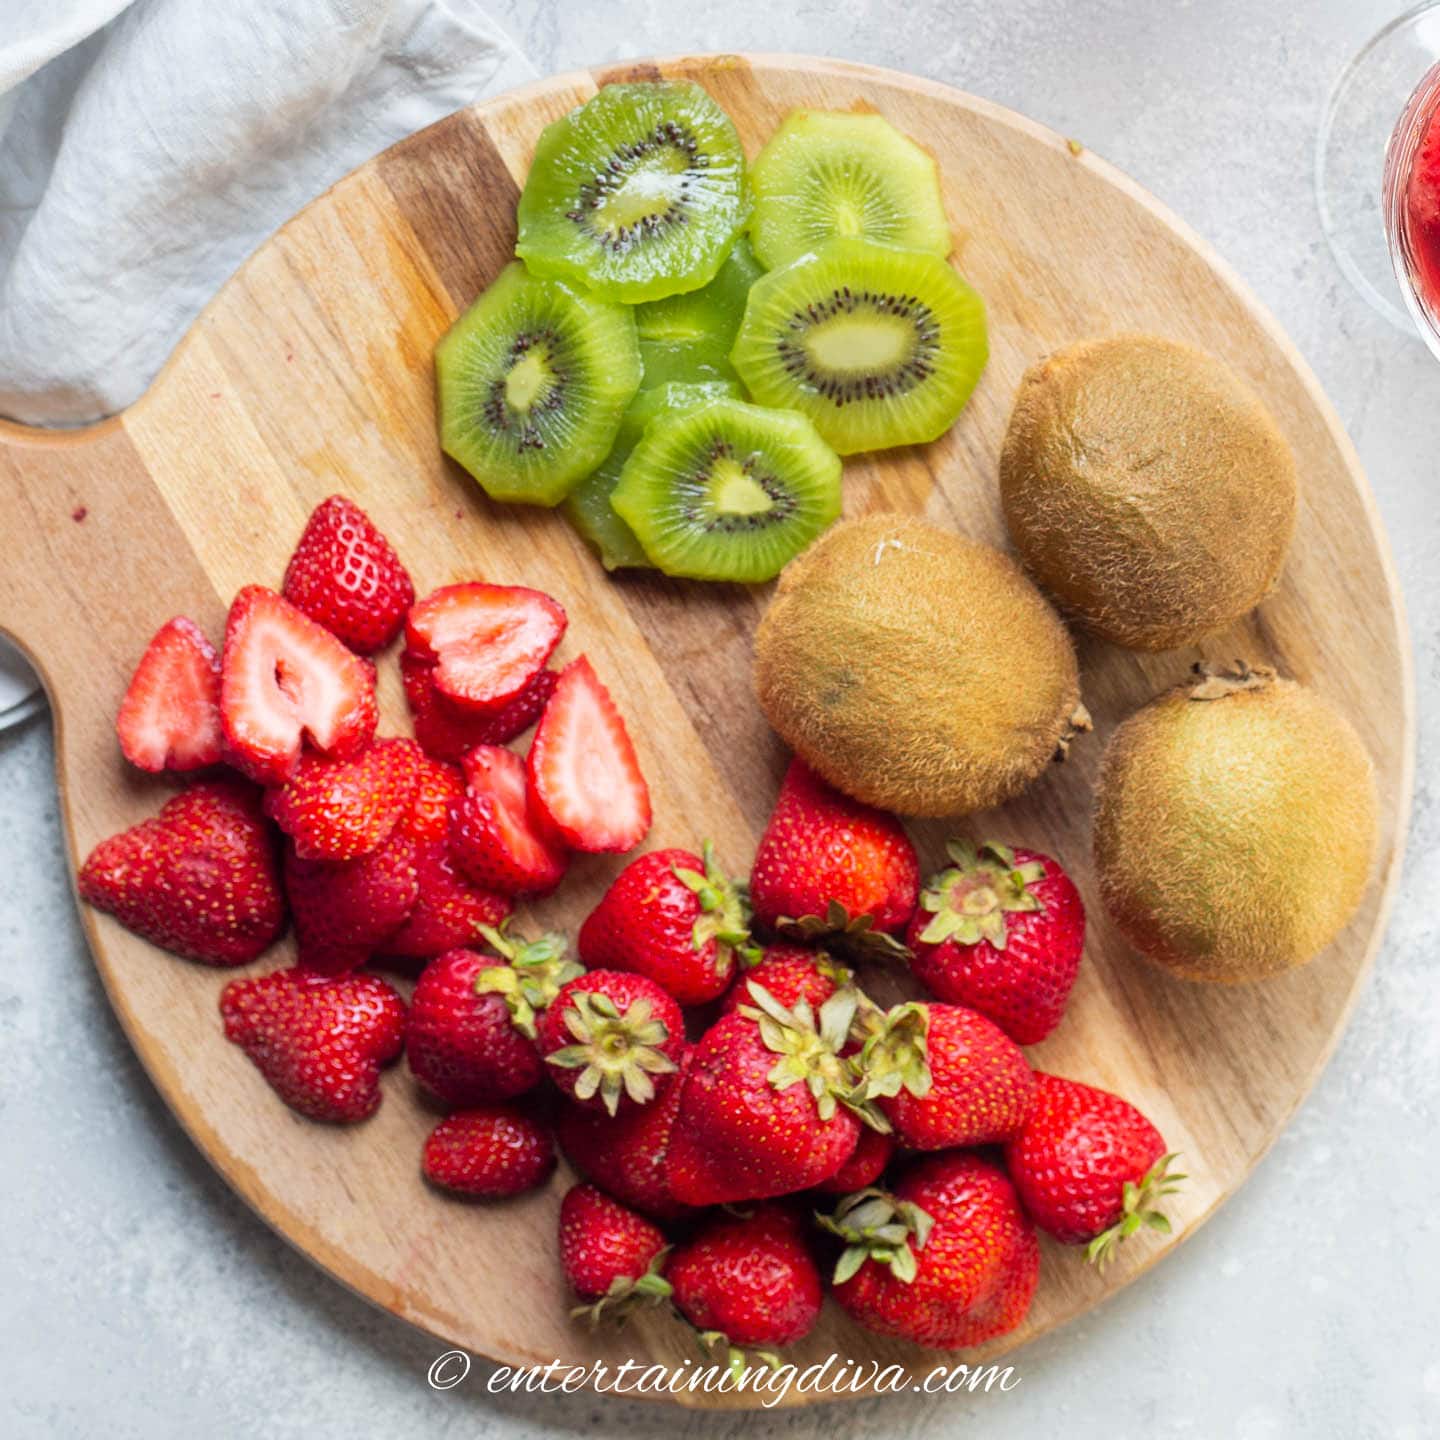 sliced strawberries and kiwis on a cutting board